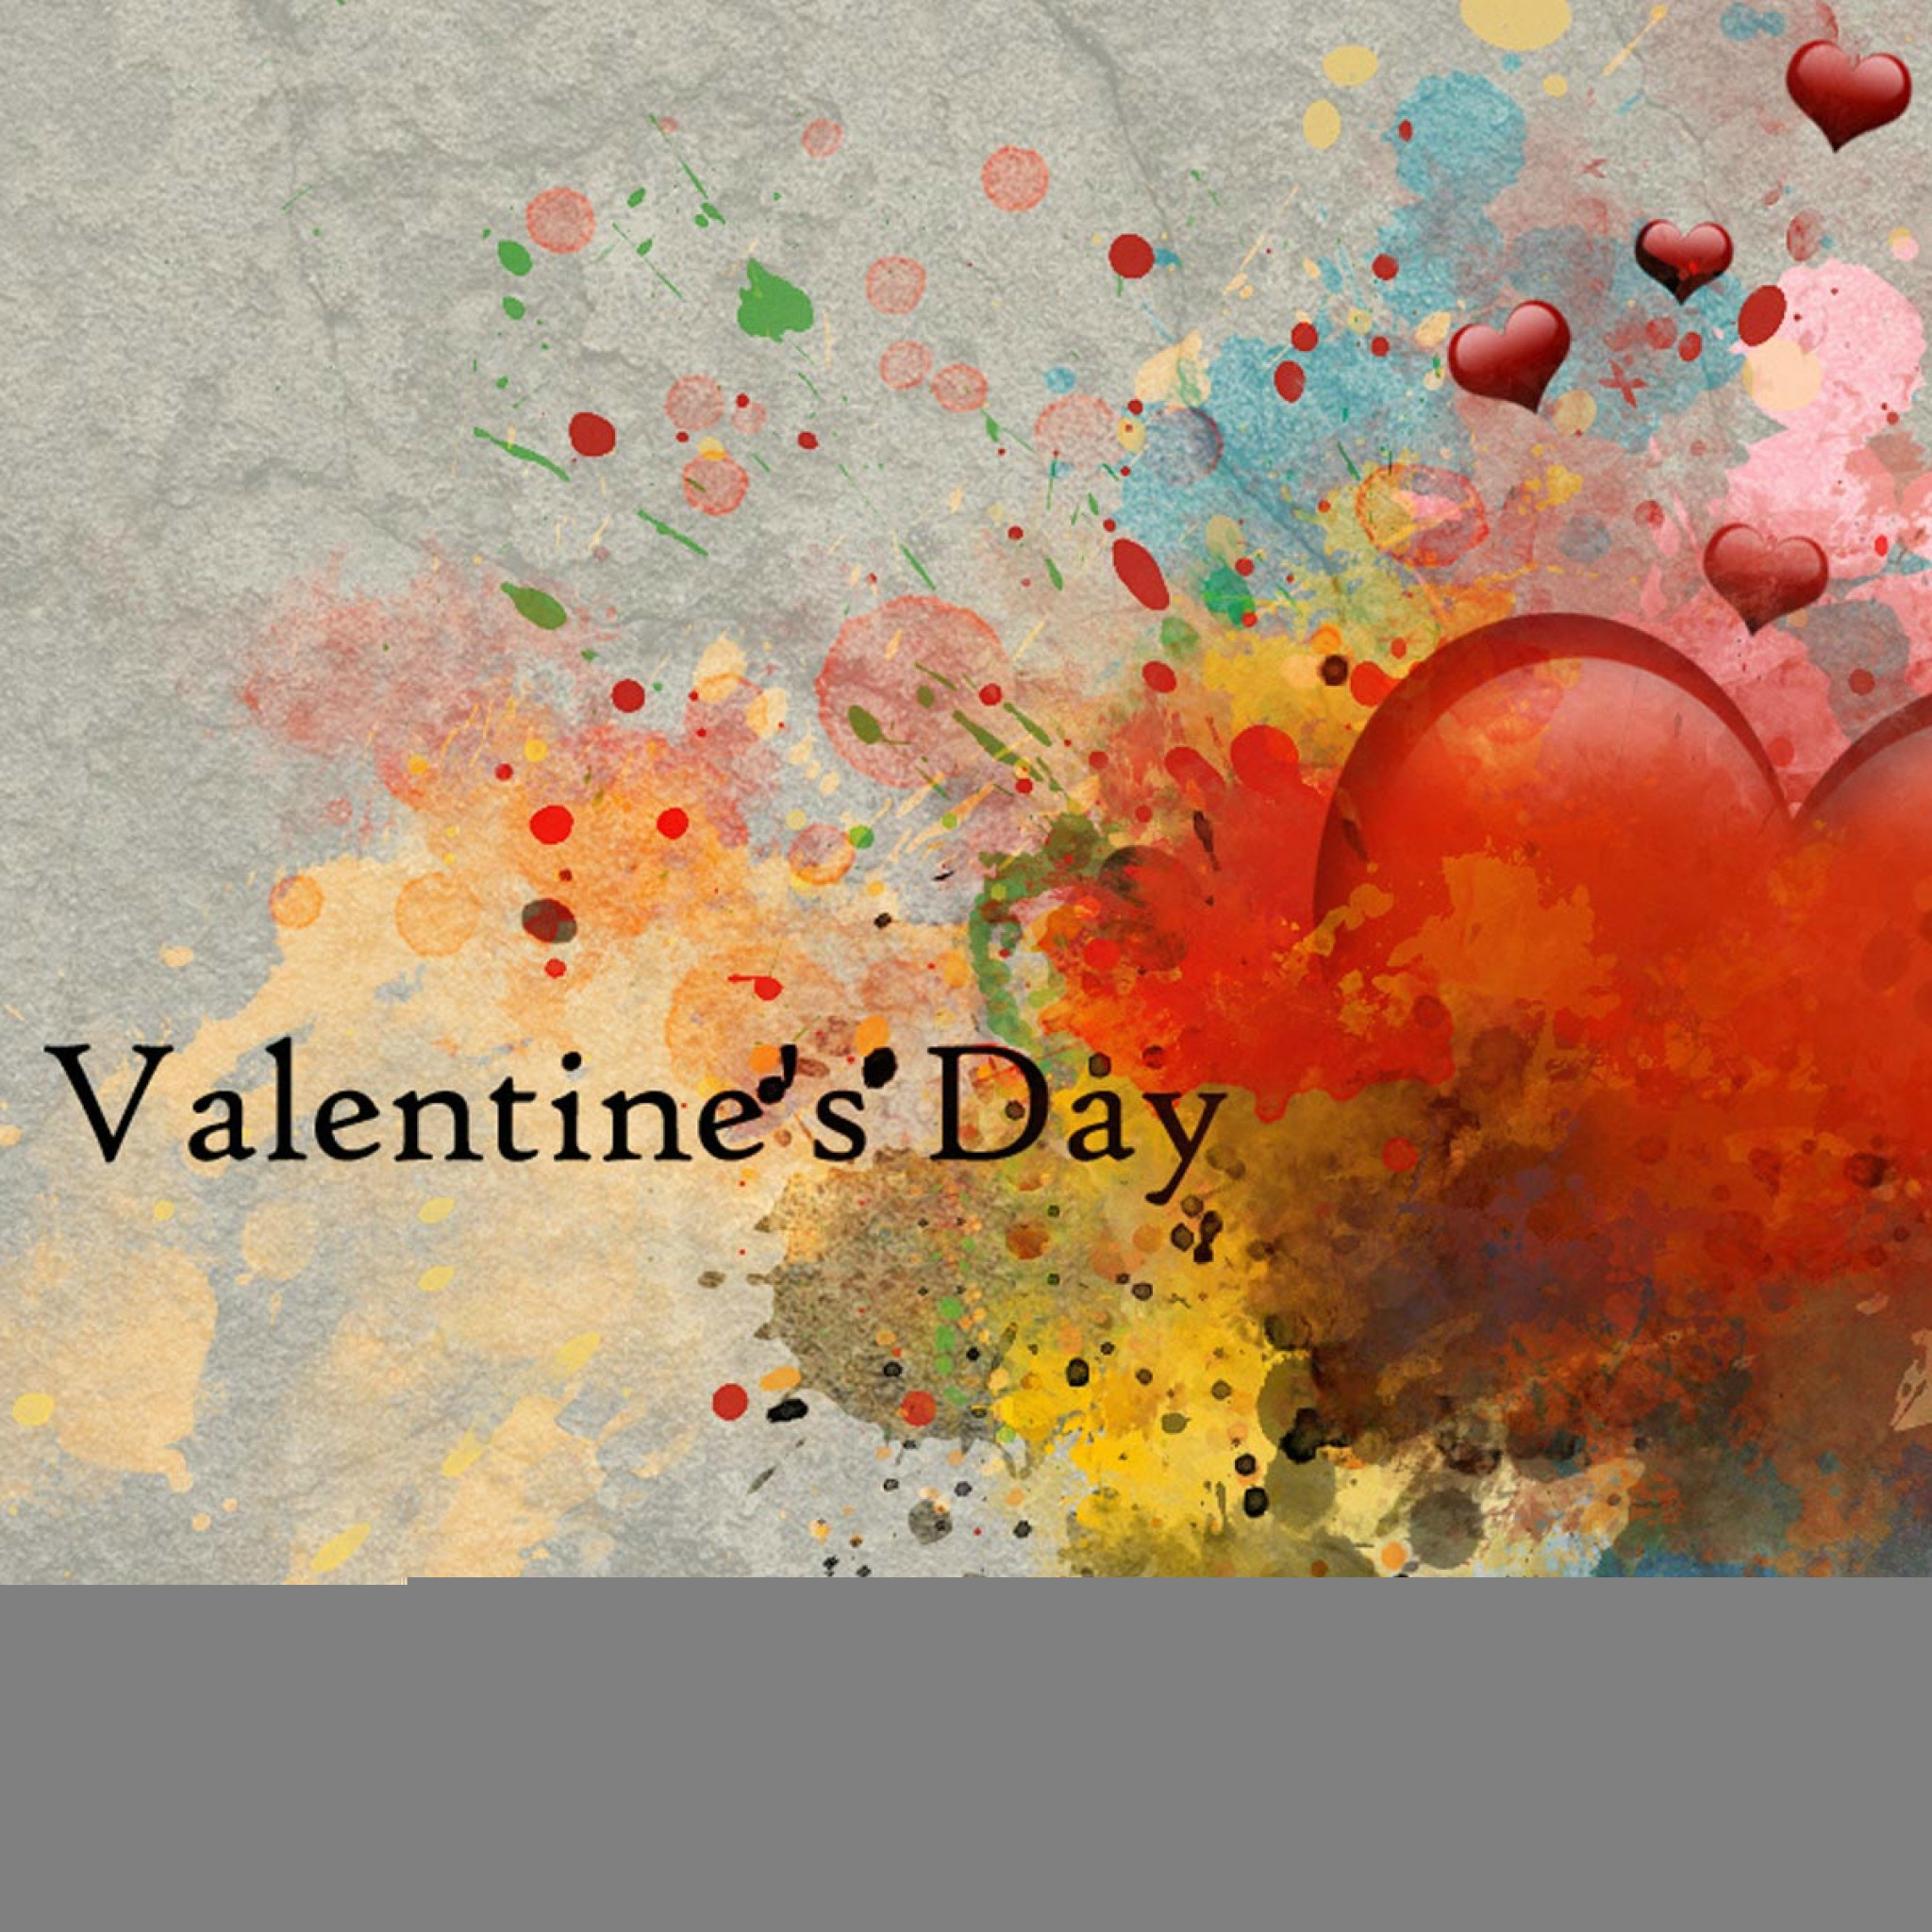 Previous Wallpaper - High Resolution Valentines Day - HD Wallpaper 